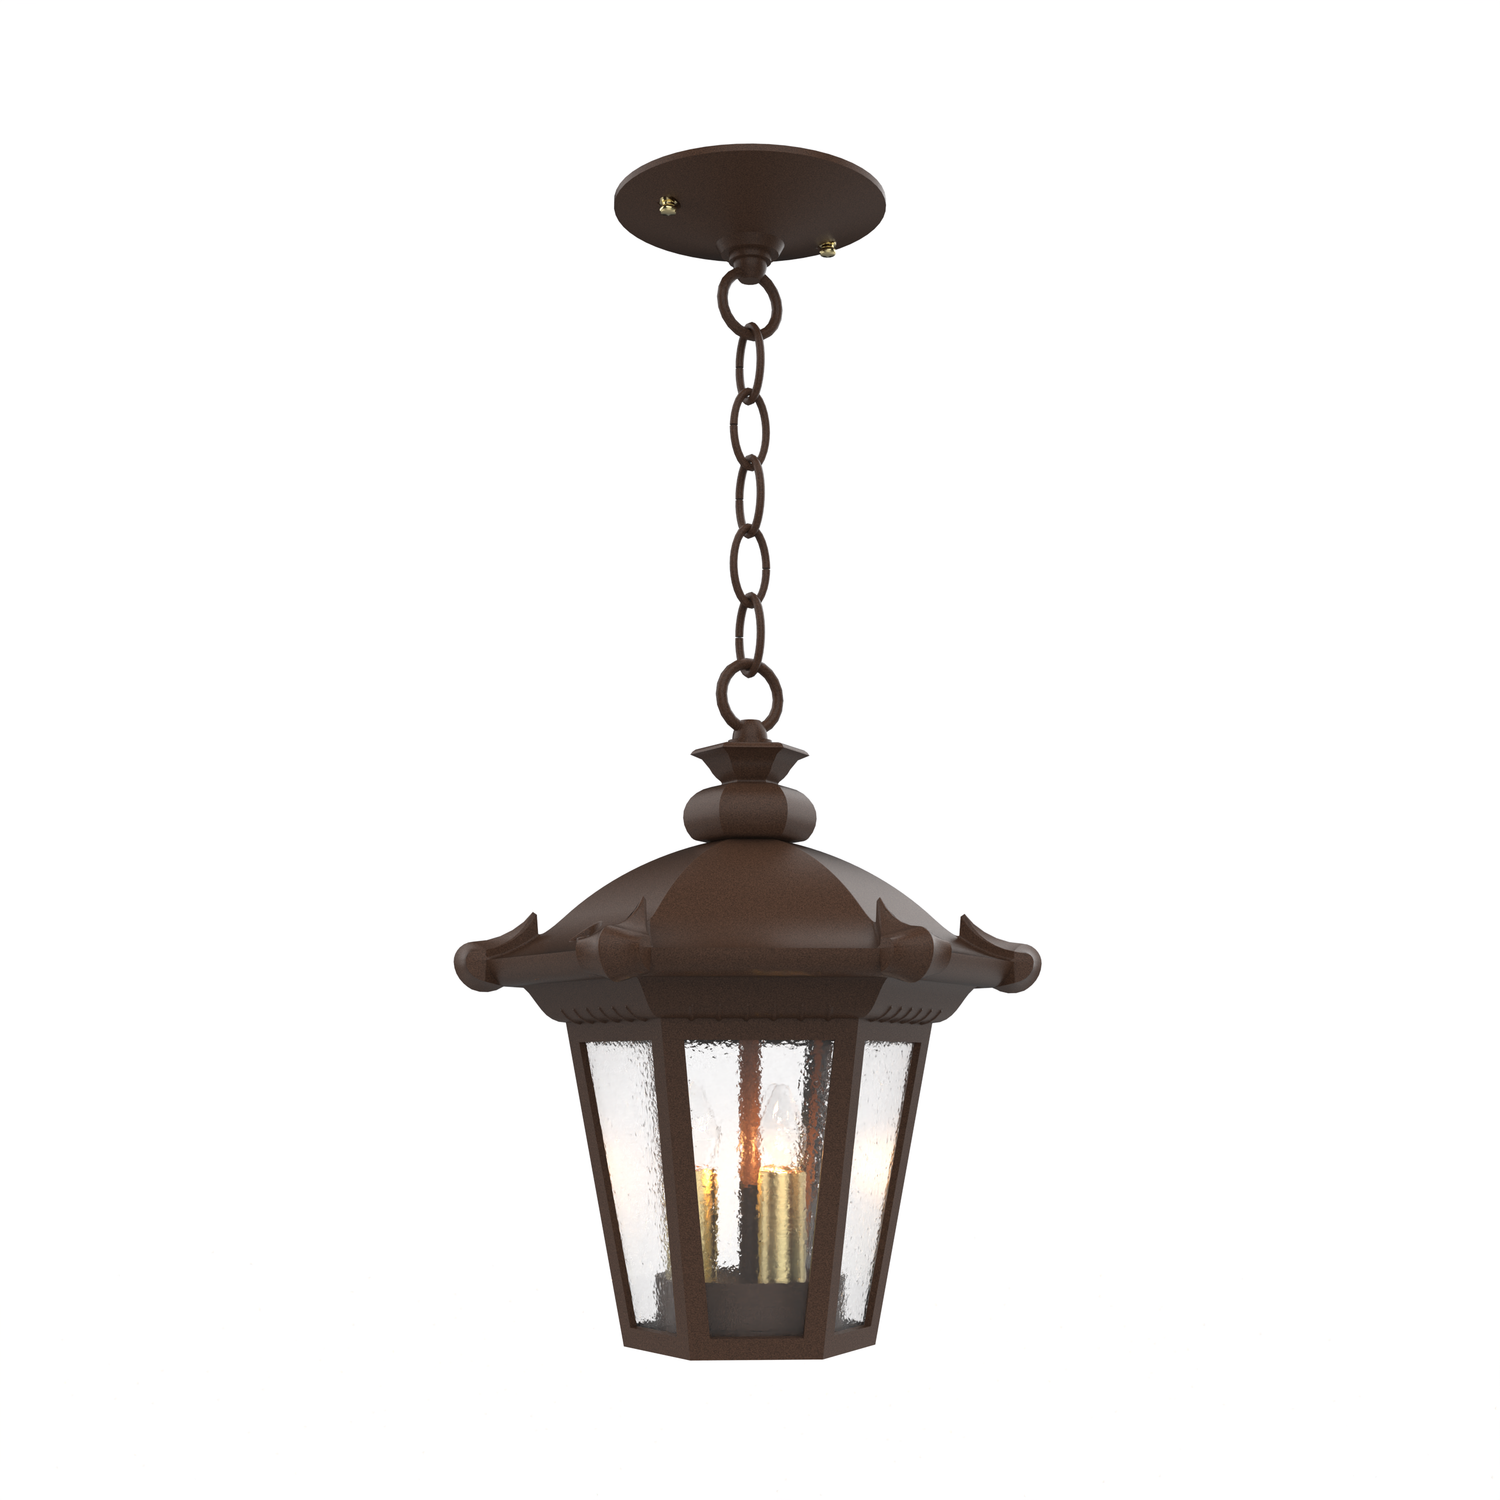 Montpellier - Ceiling mounting with chain open bottom small format - 13350